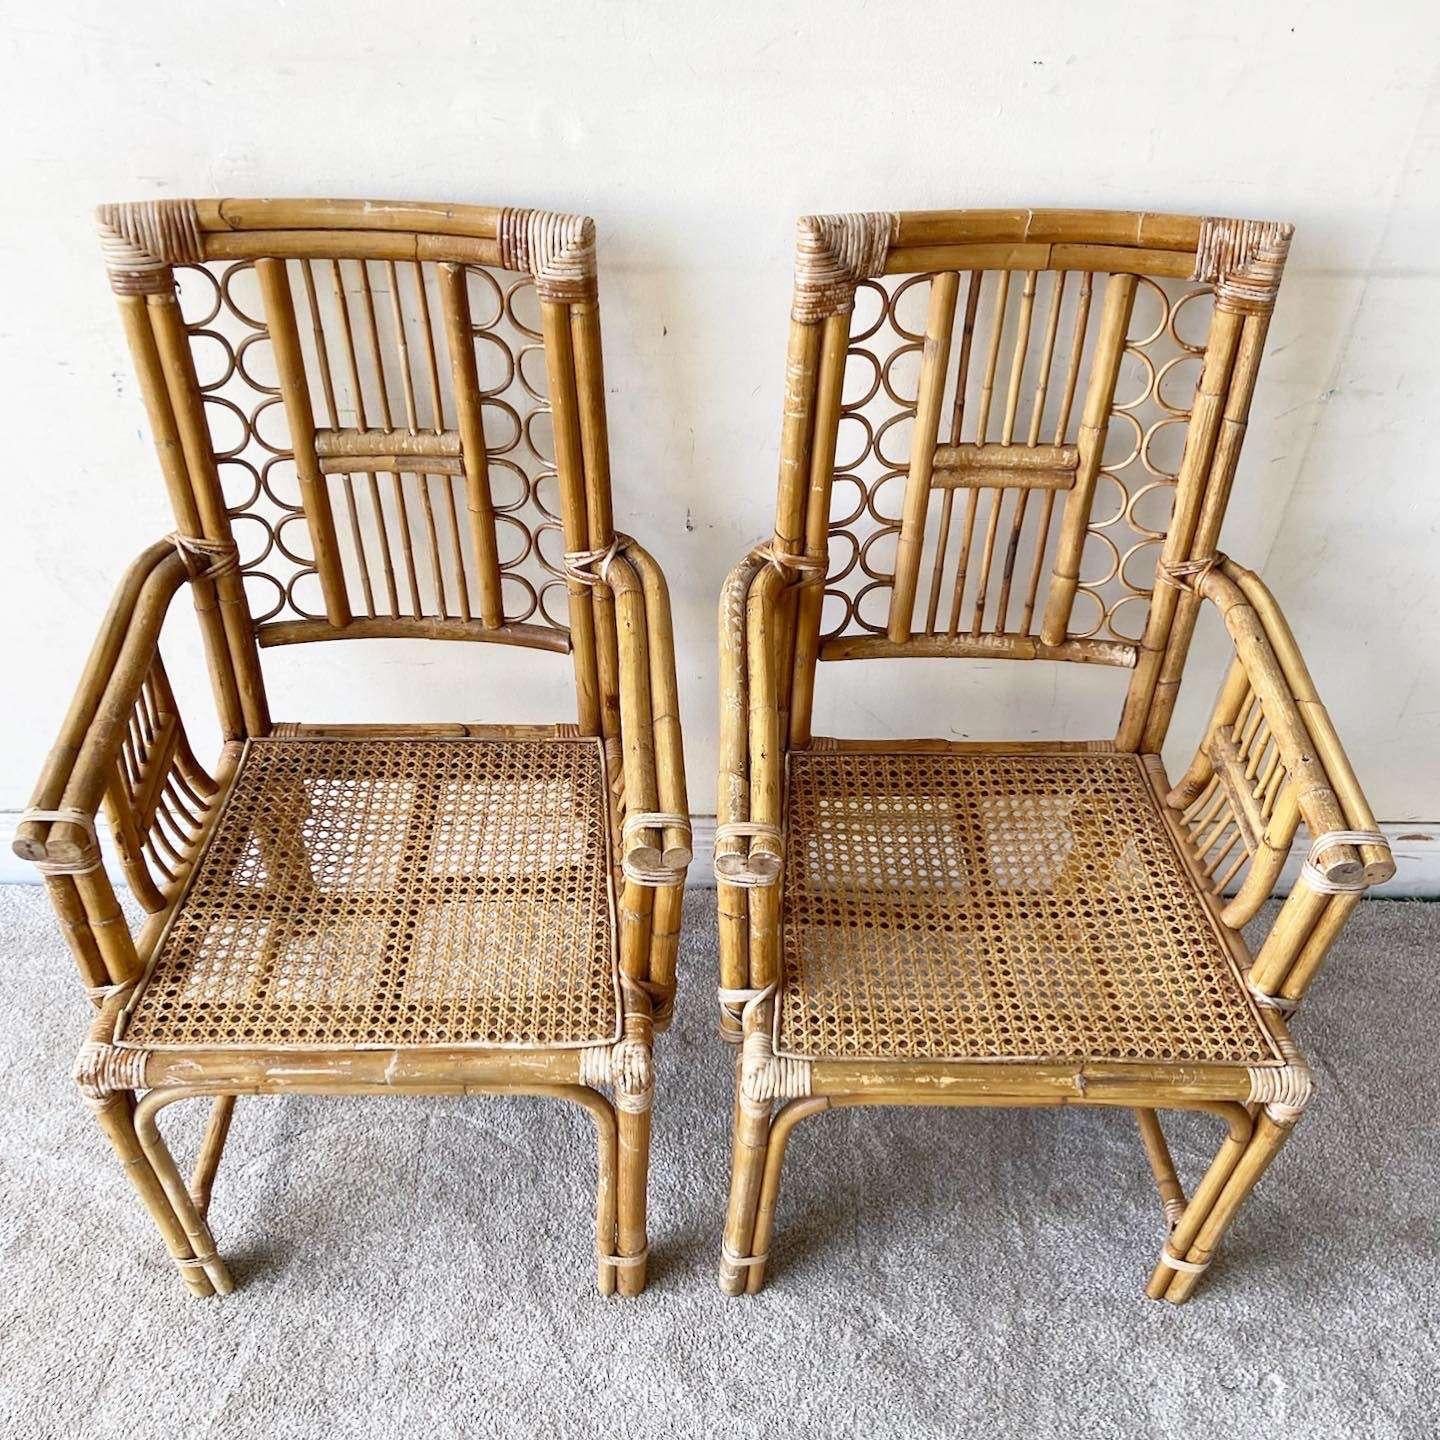 Phenomenal pair of vintage bohemian bamboo and rattan dining chairs. Each feature a can seat with a fretted back rest.

Seat height is 17.0 in